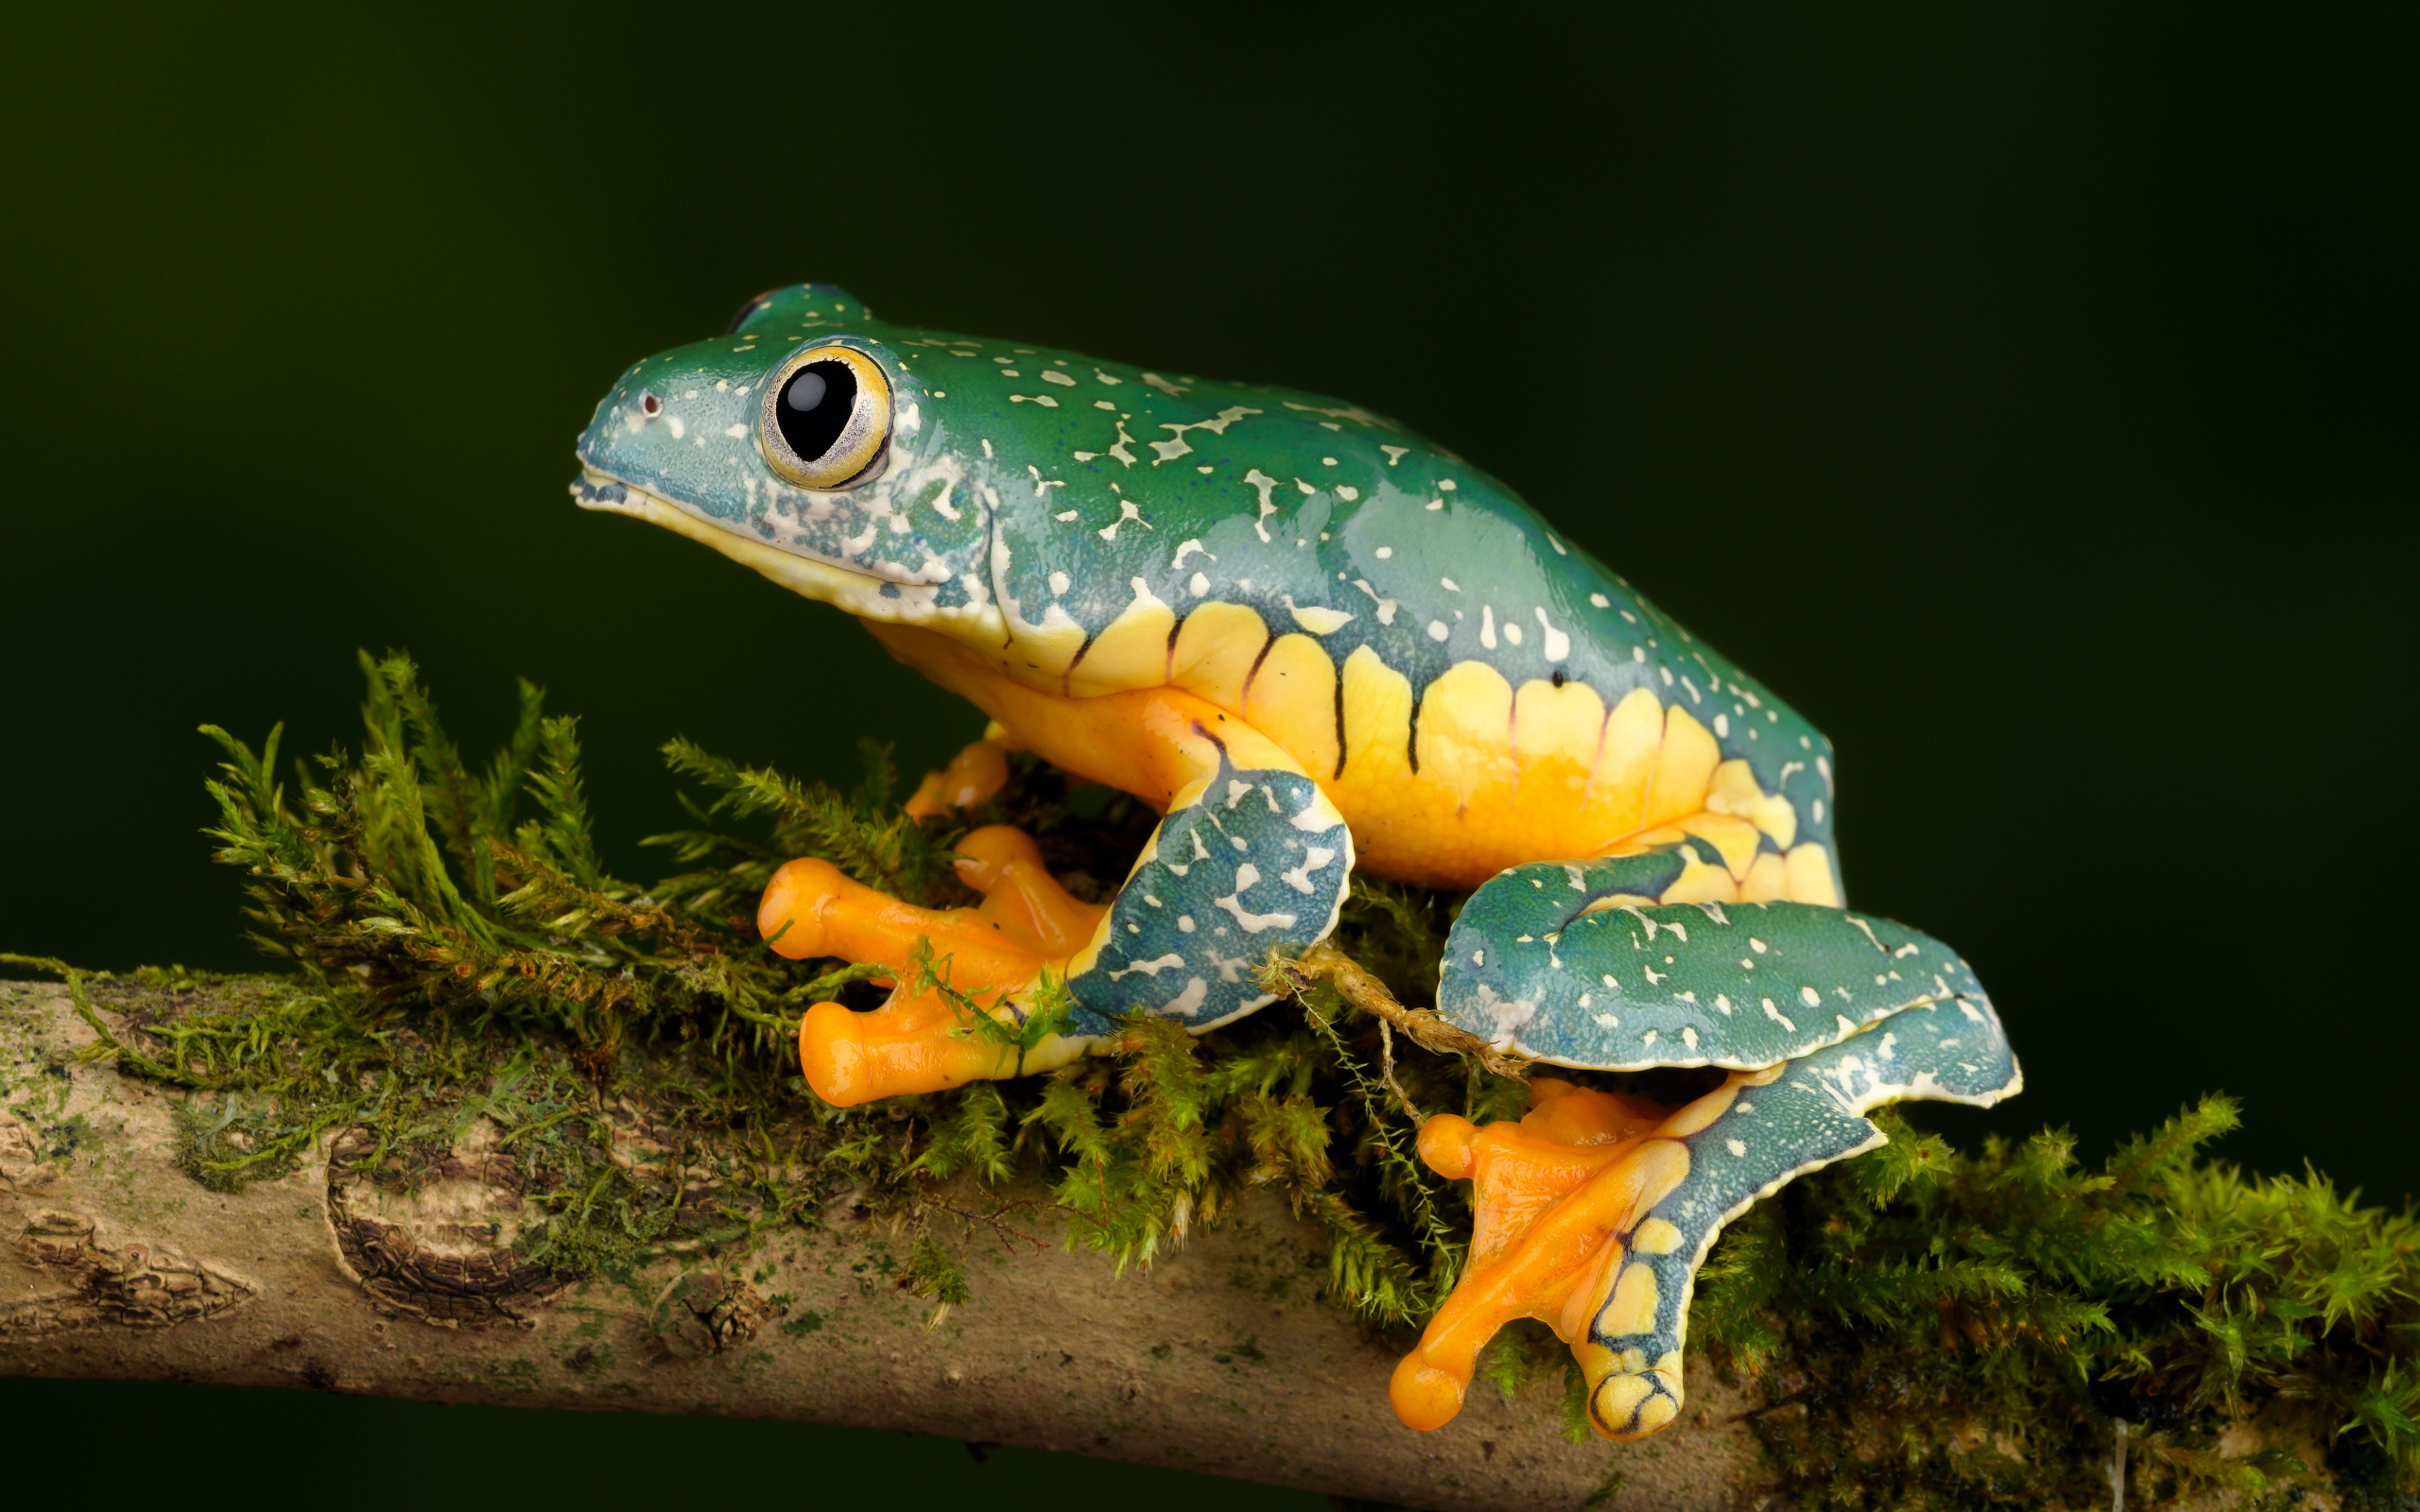 A green frog with a yellow belly sits on a branch